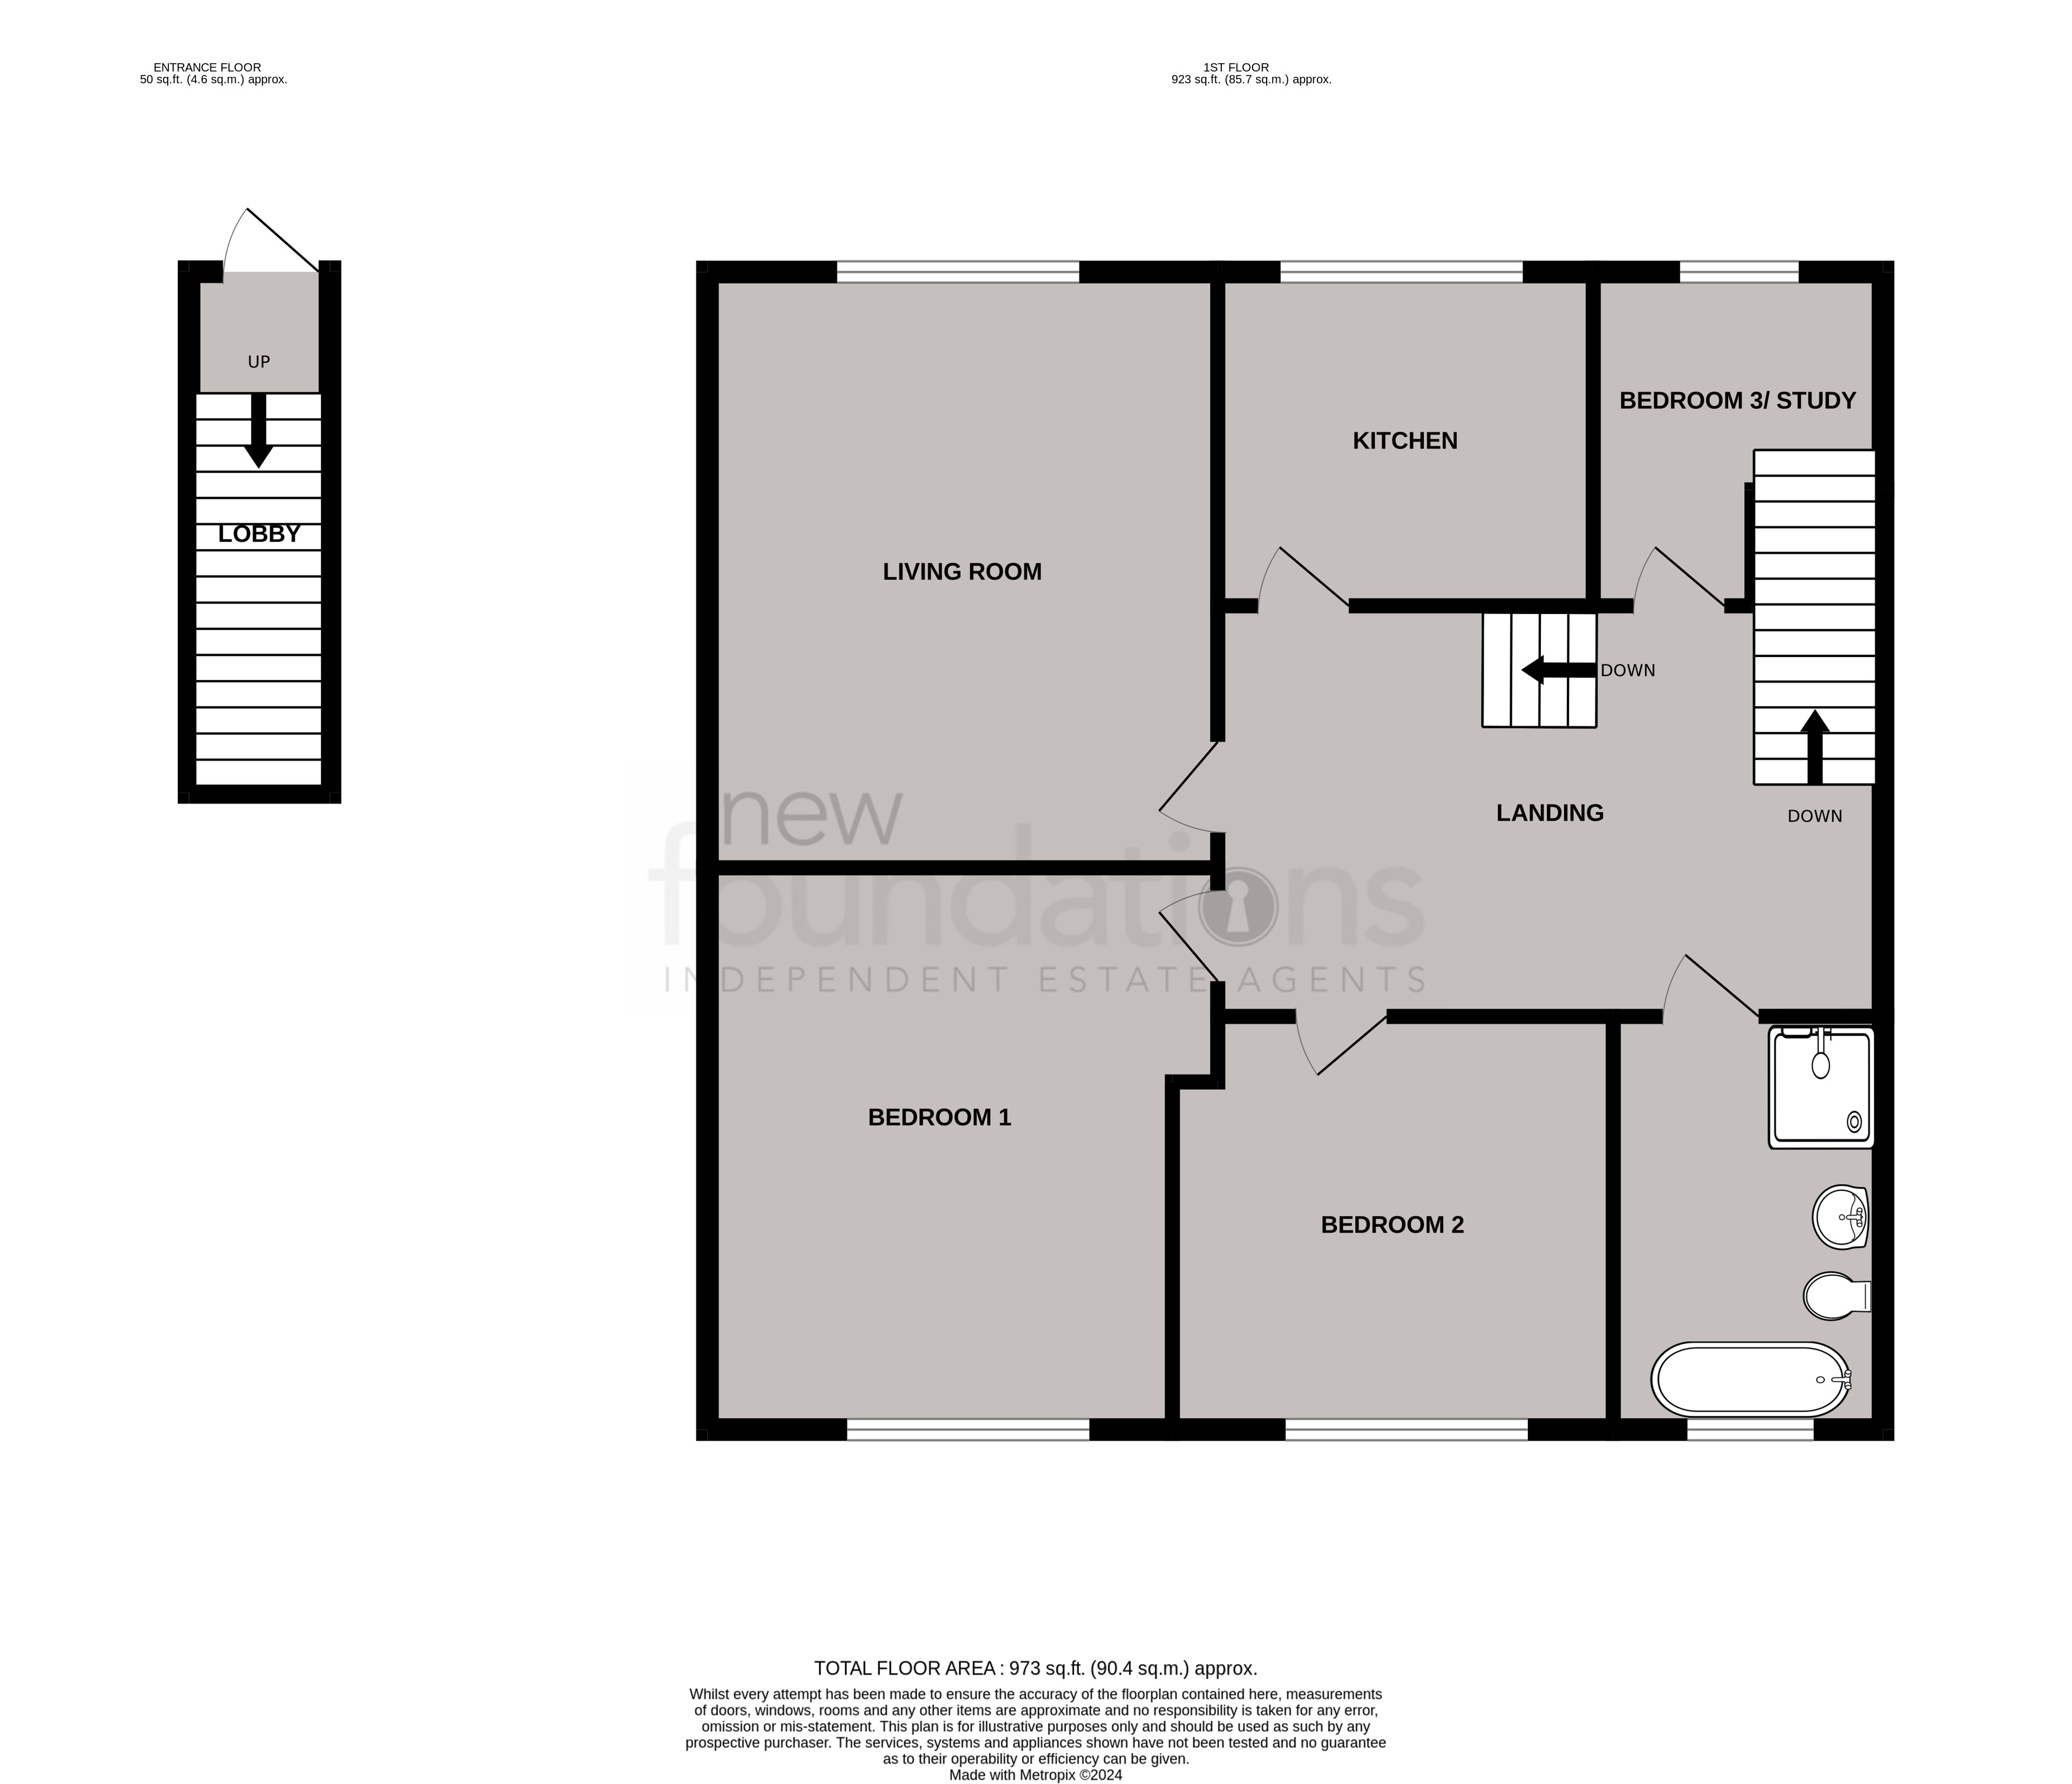 Floorplans For Woodville Road, Bexhill-on-Sea, East Sussex